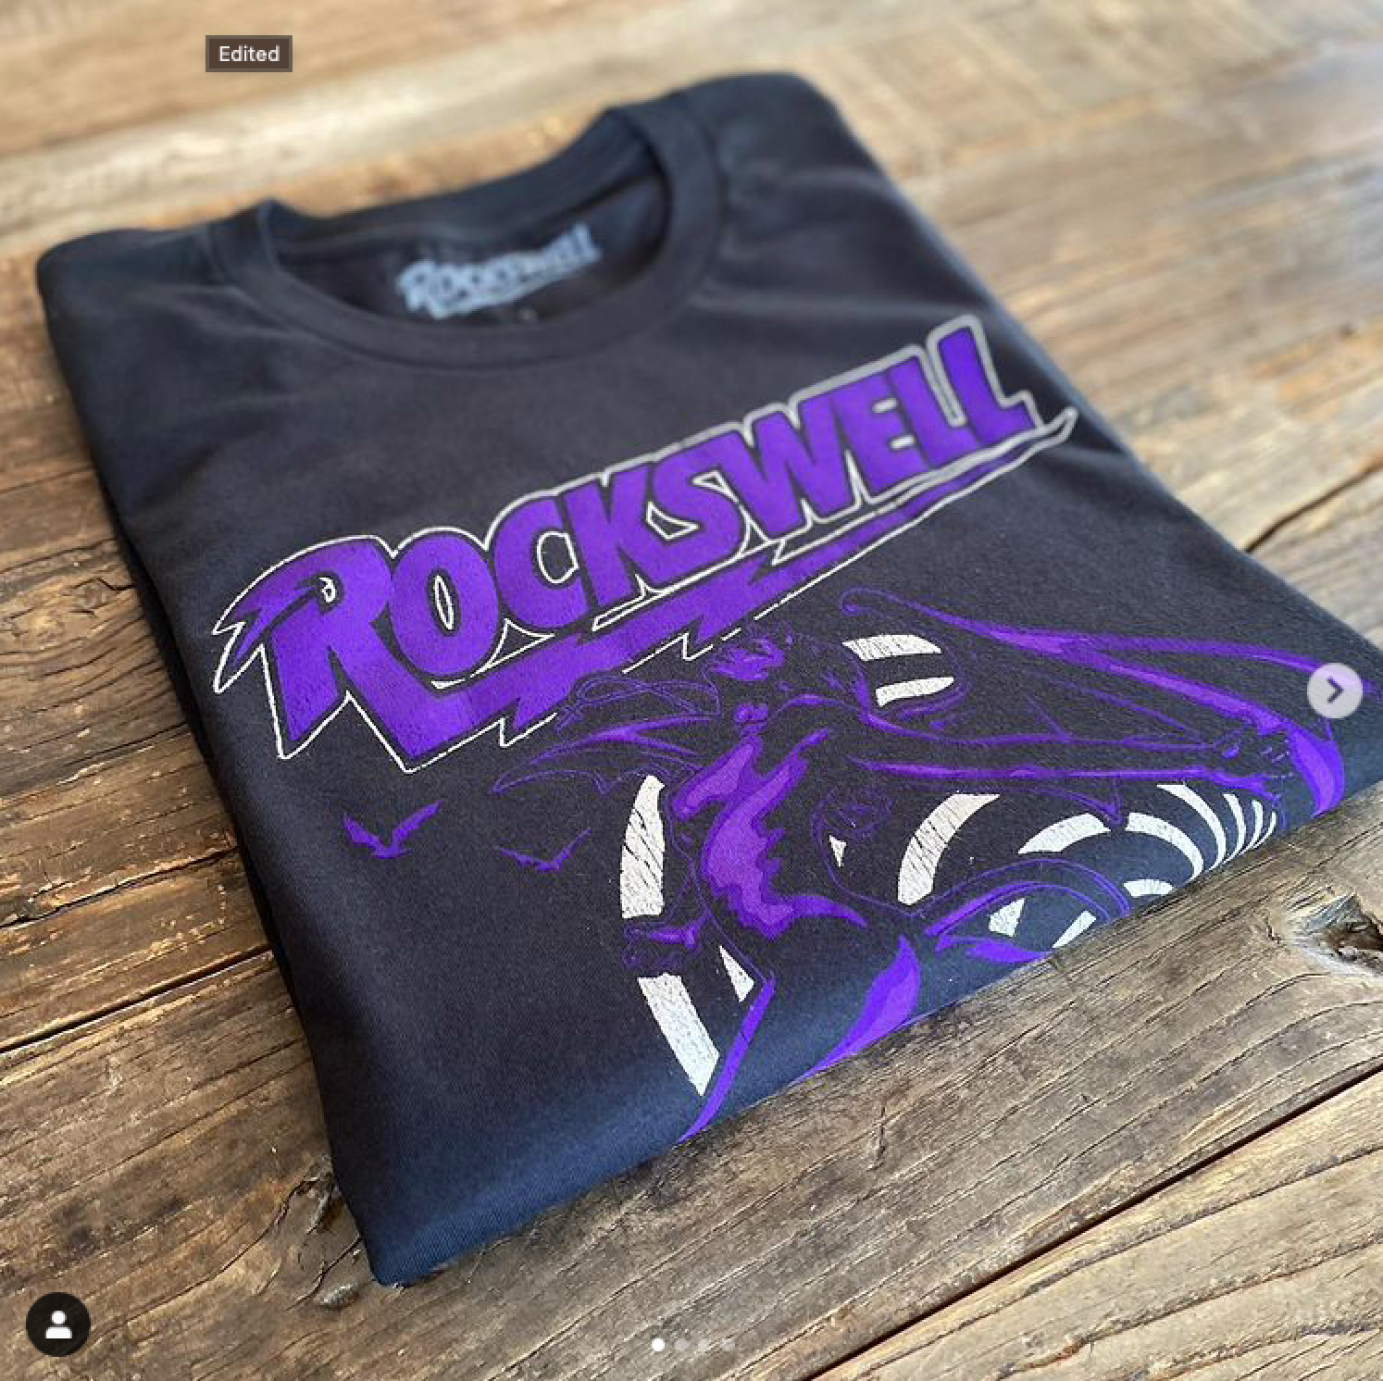 Band Merch by Rockswell